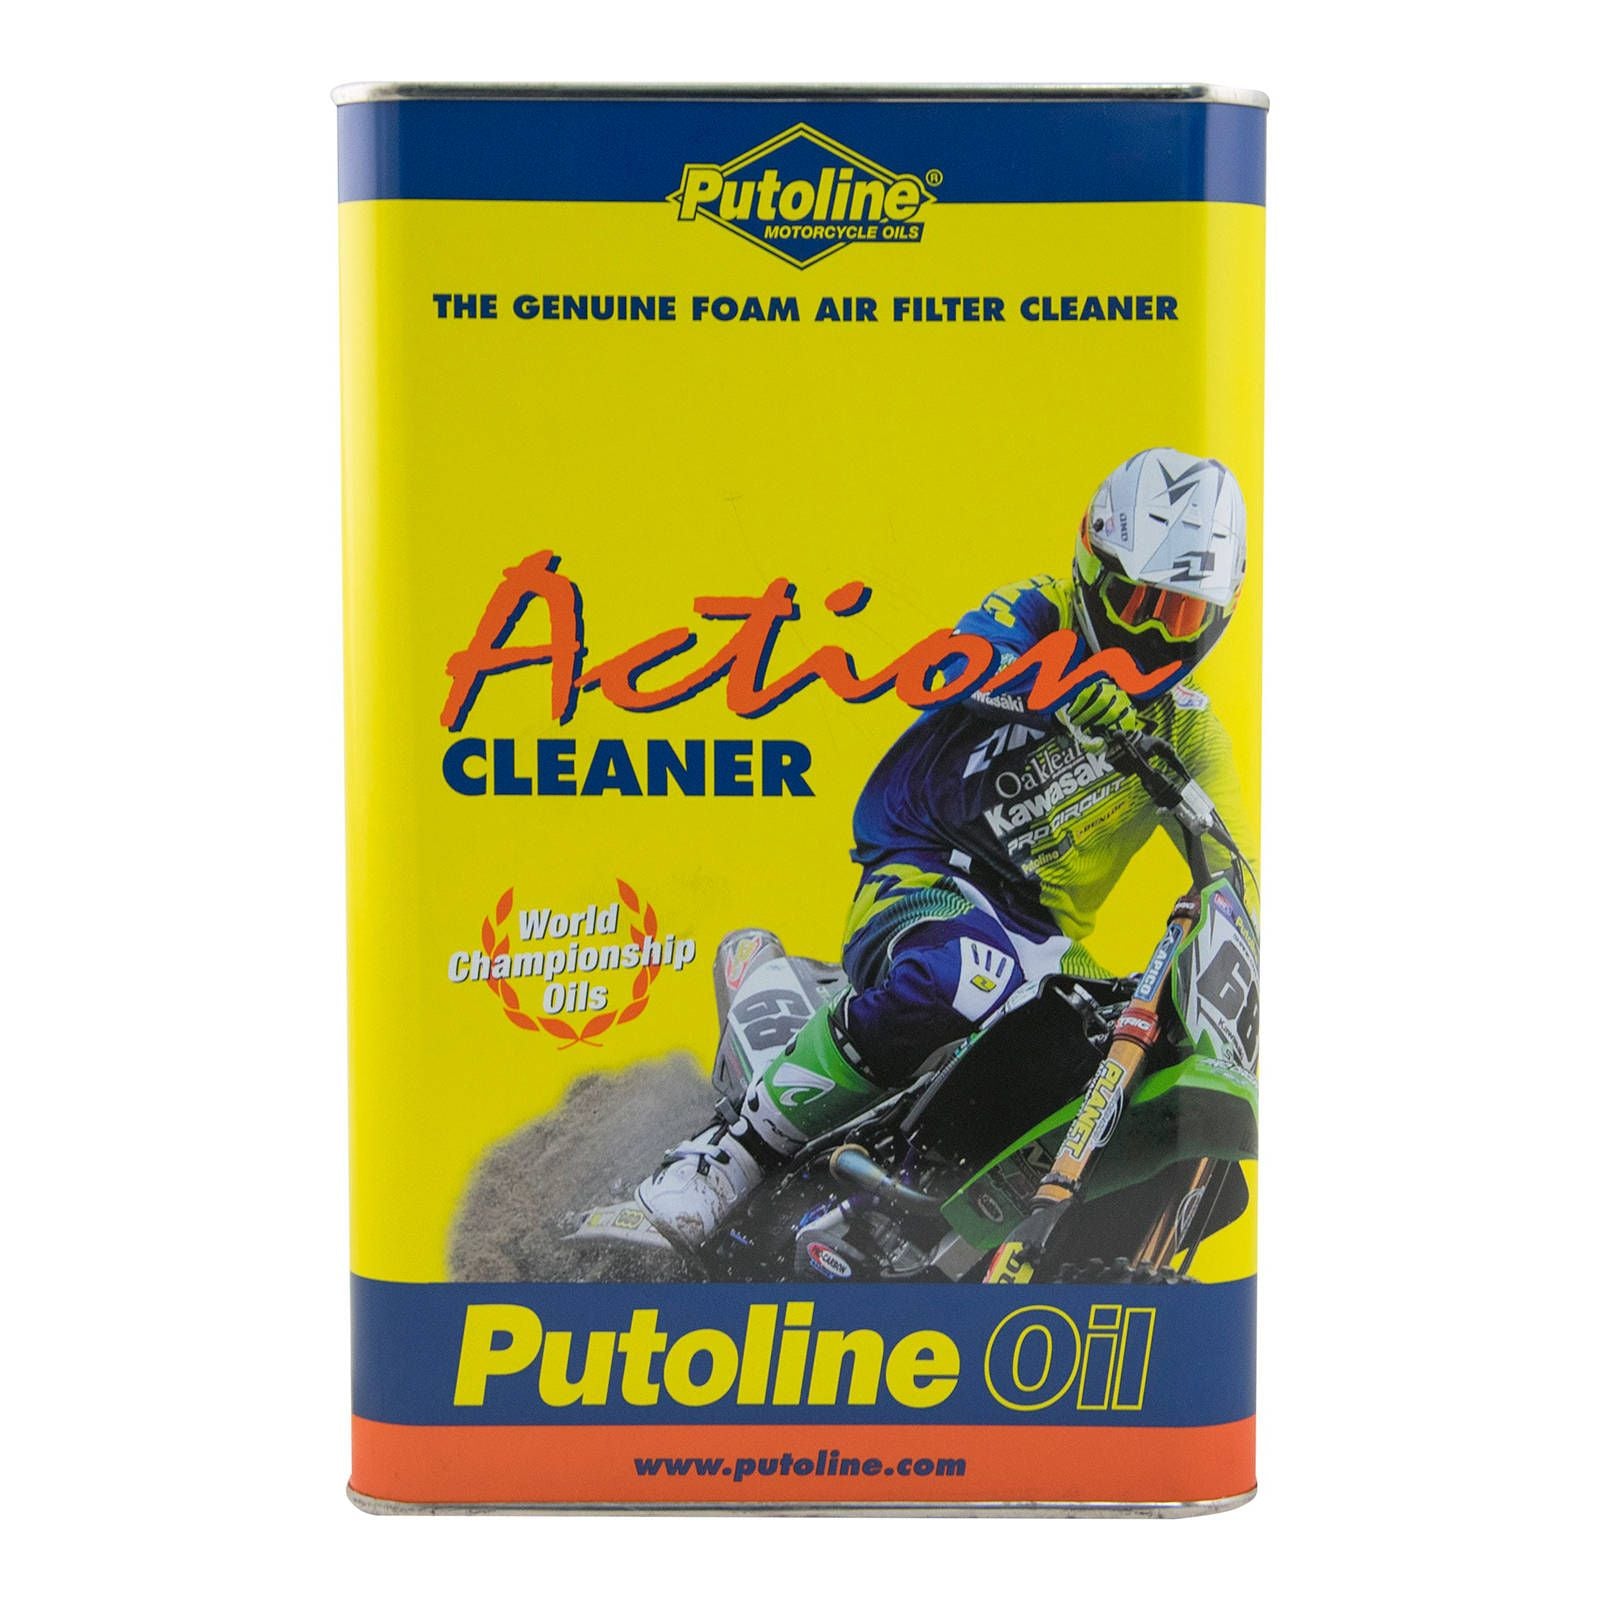 New PUTOLINE Action Air Filter Cleaner (2L) #PTAAFC2L